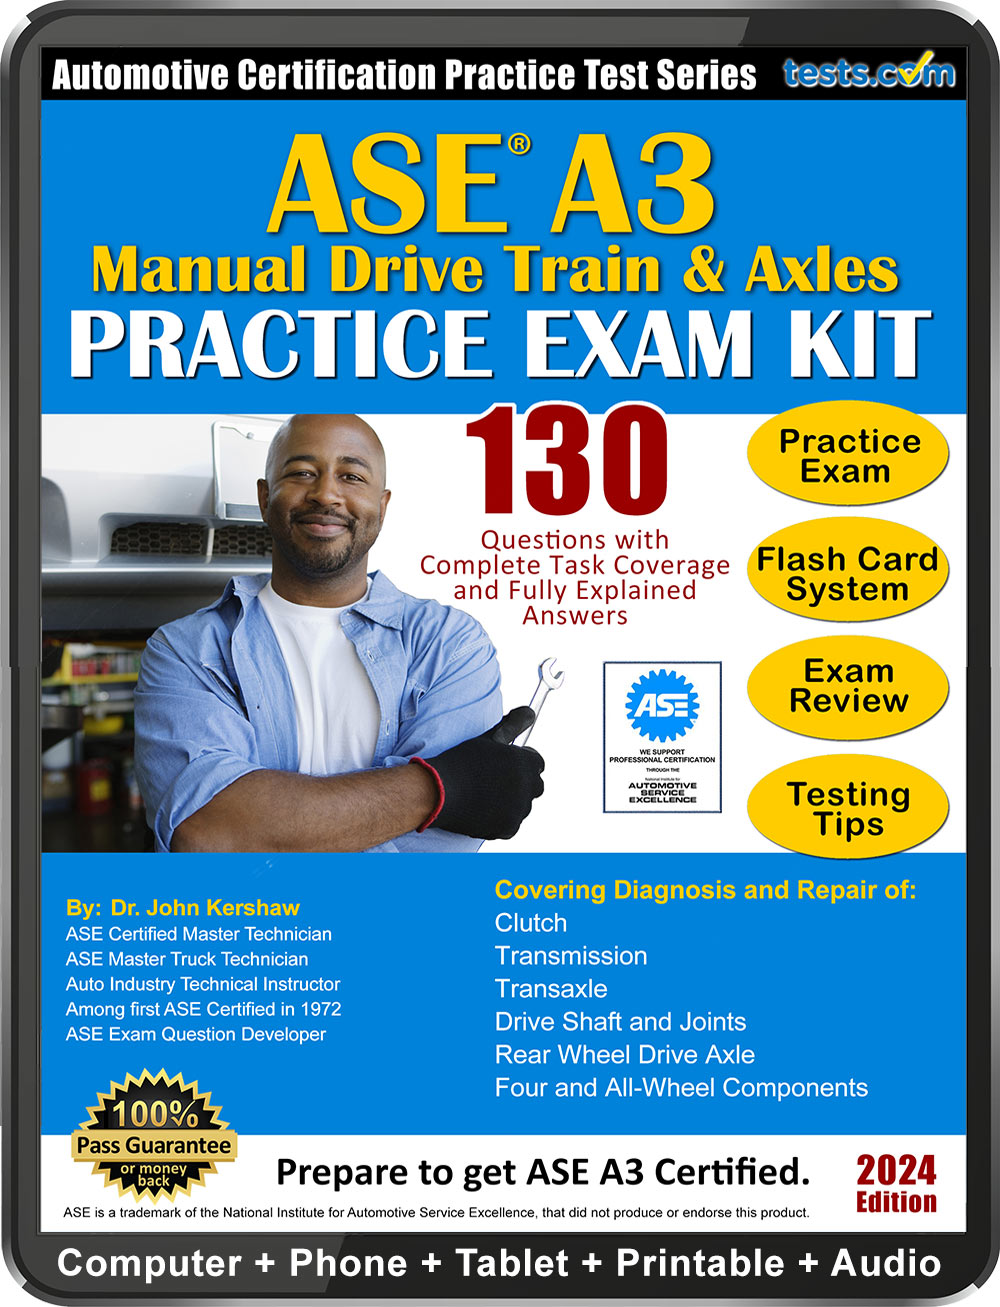 ASE A3 Practice Test